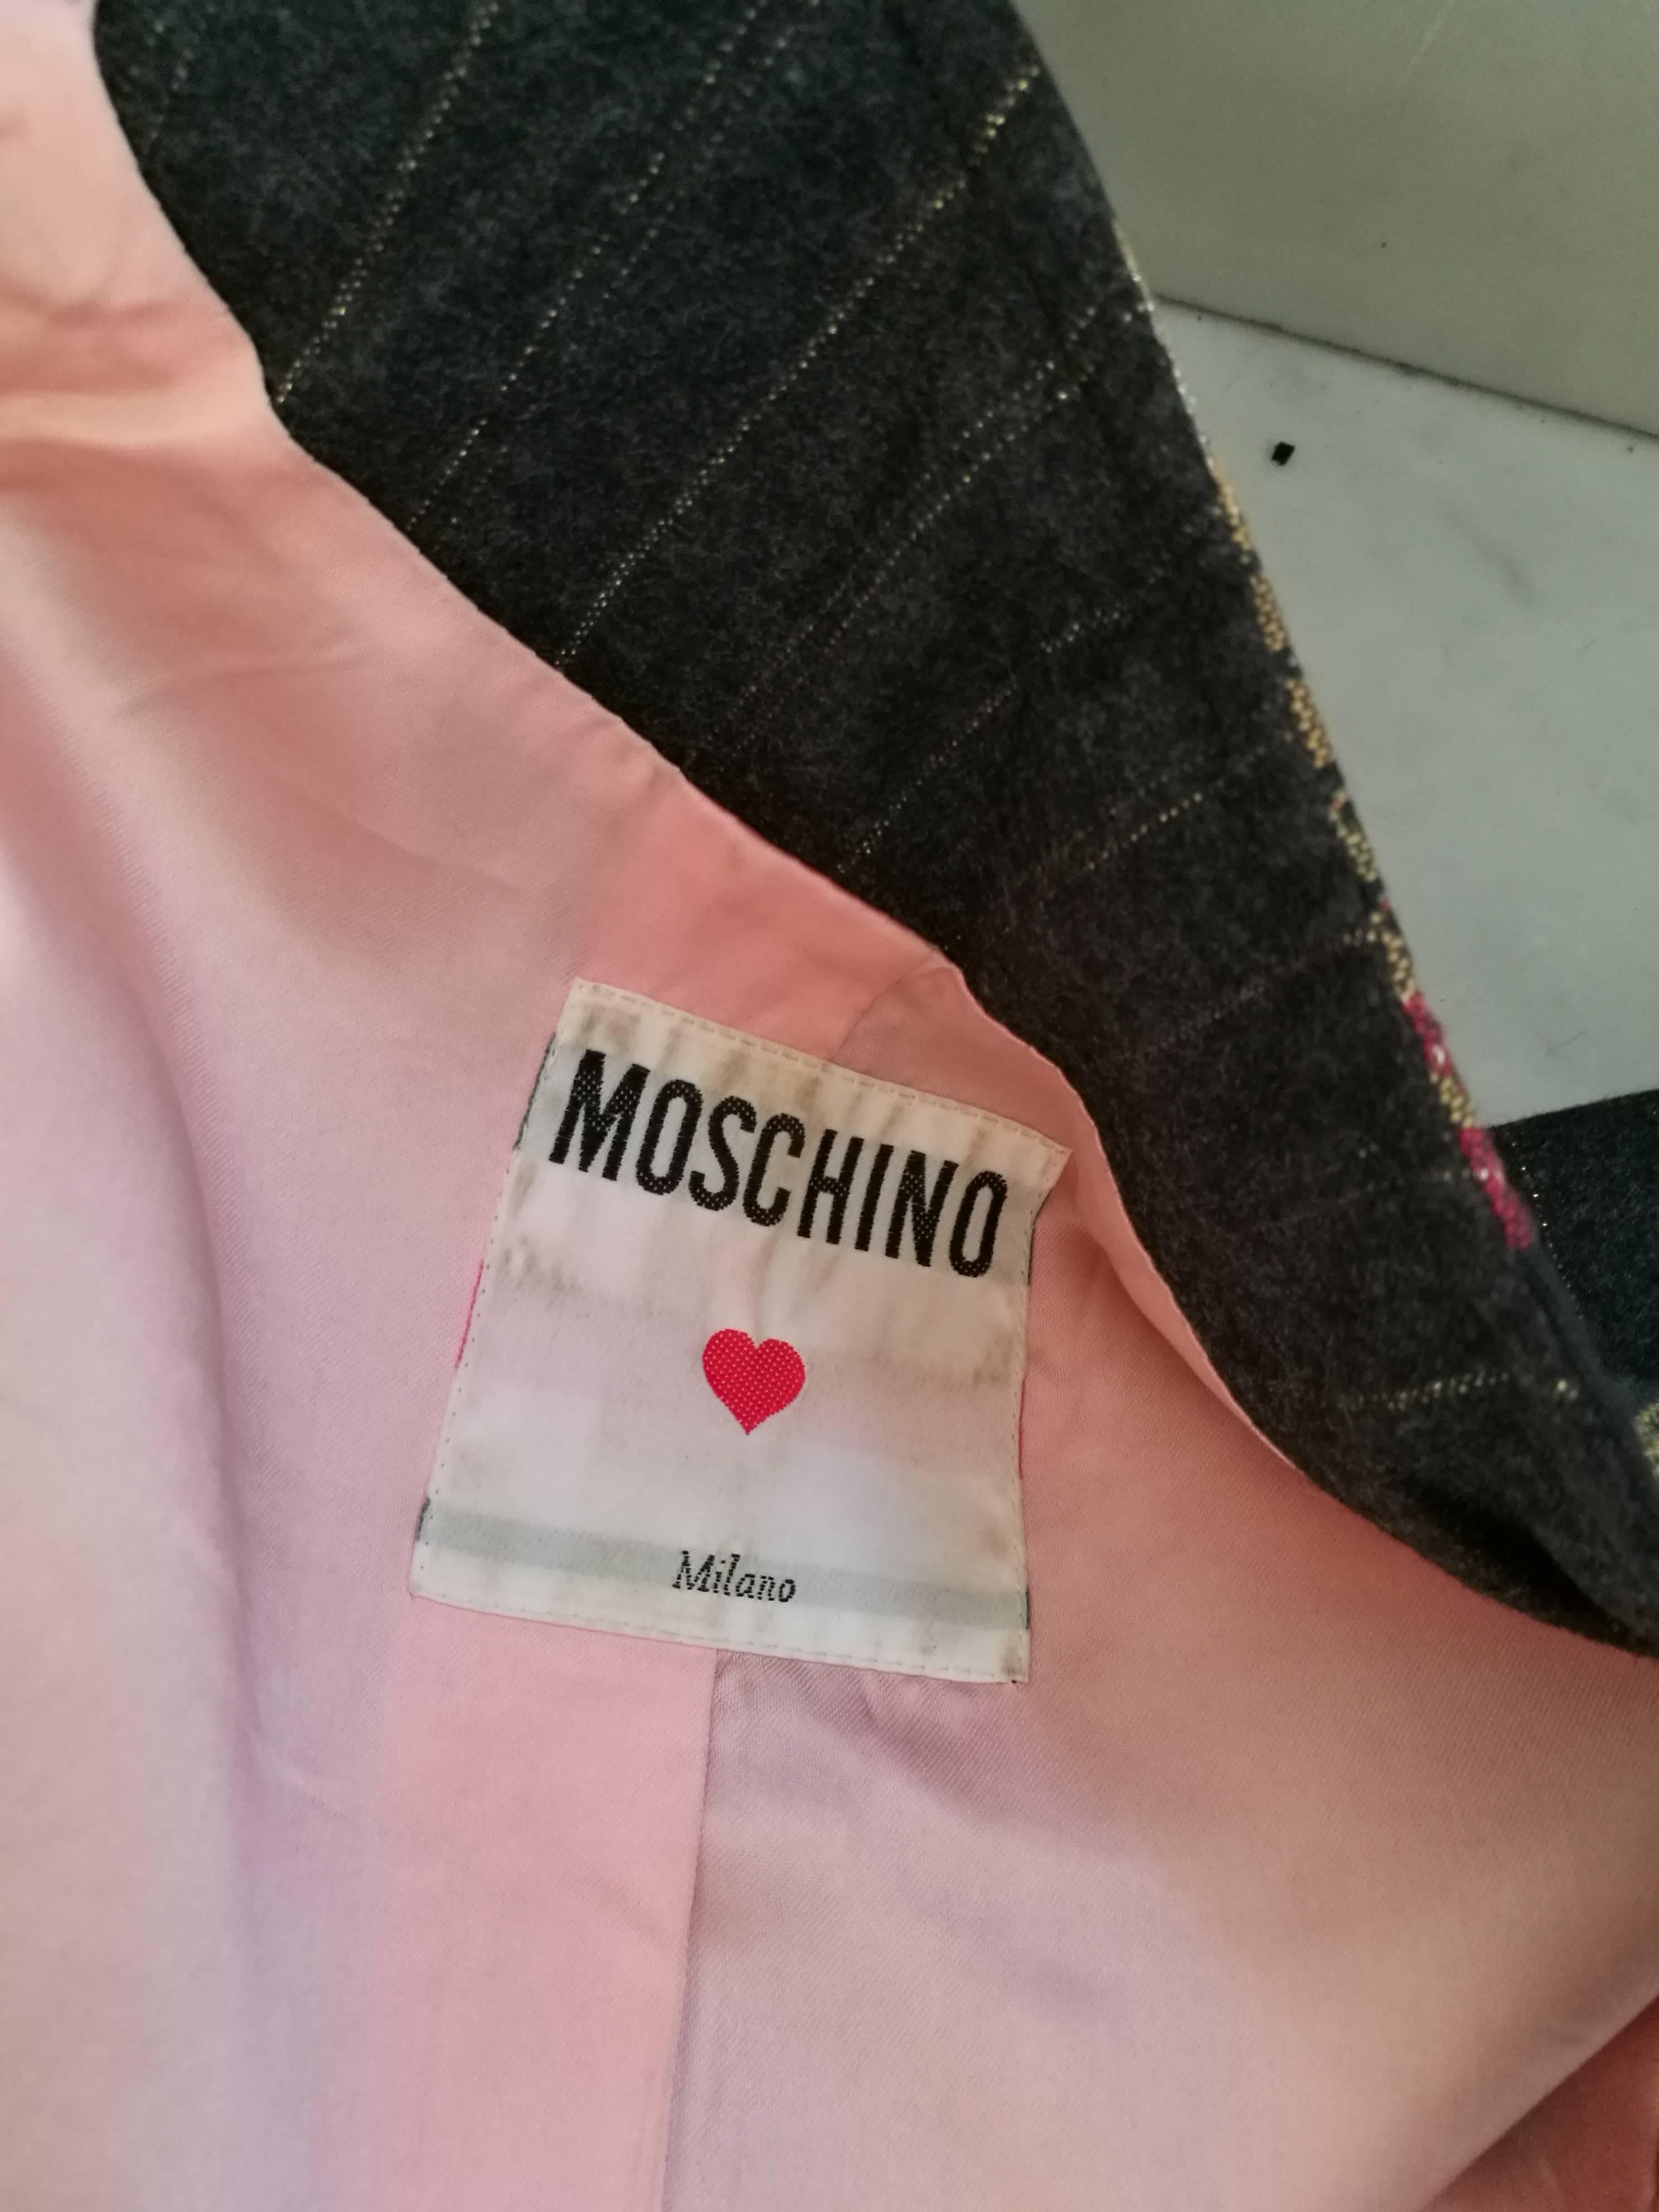 Moschino Milano Jacket In Excellent Condition For Sale In Capri, IT